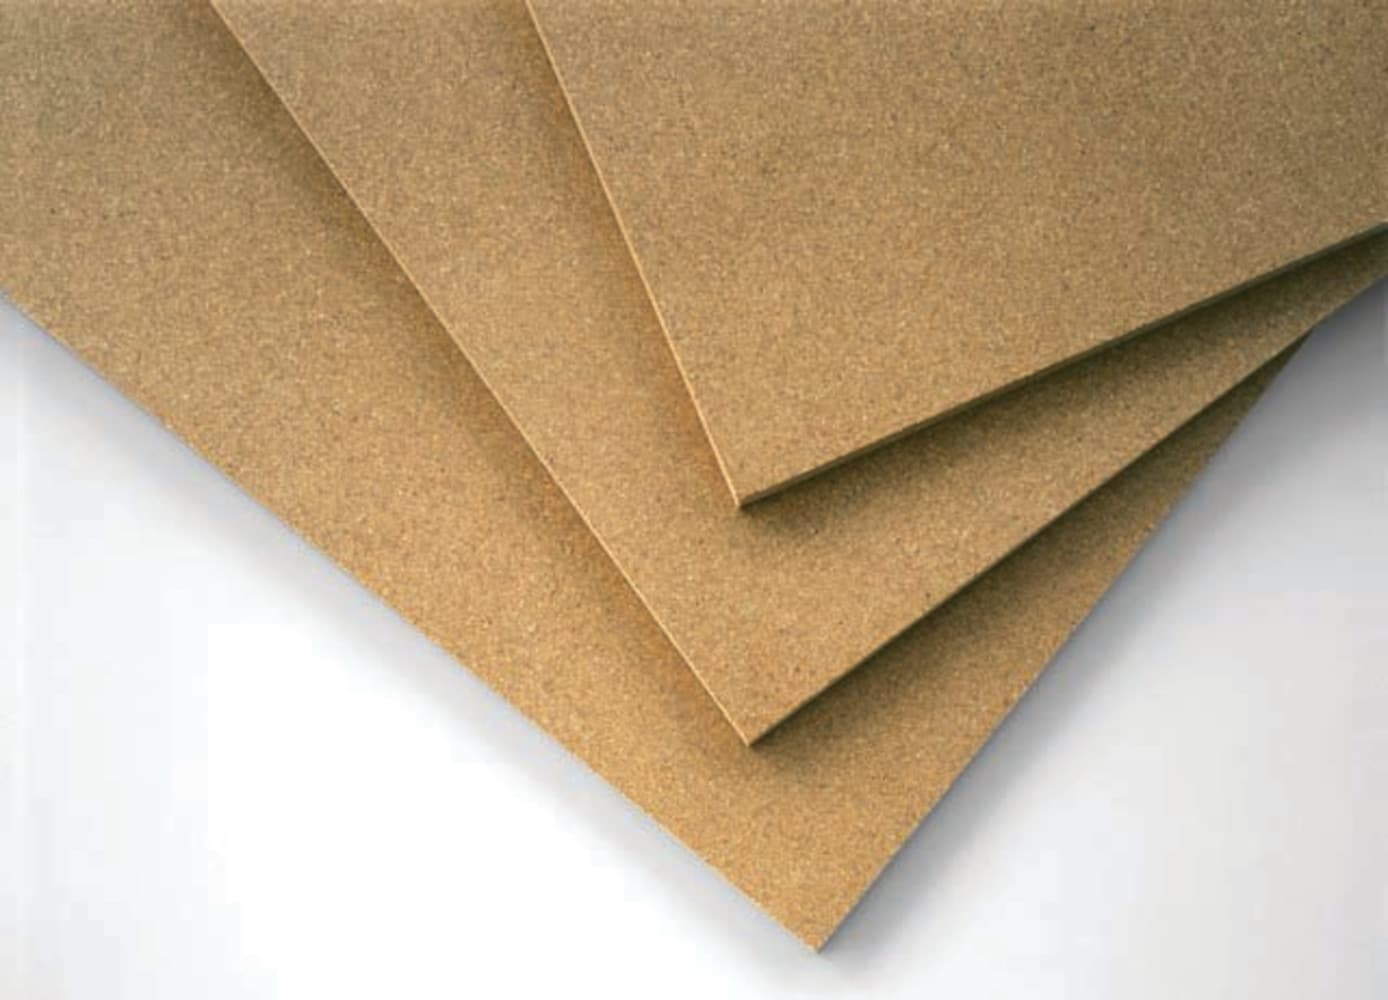 5/8-in x 4-ft x 4-ft Particle Board at